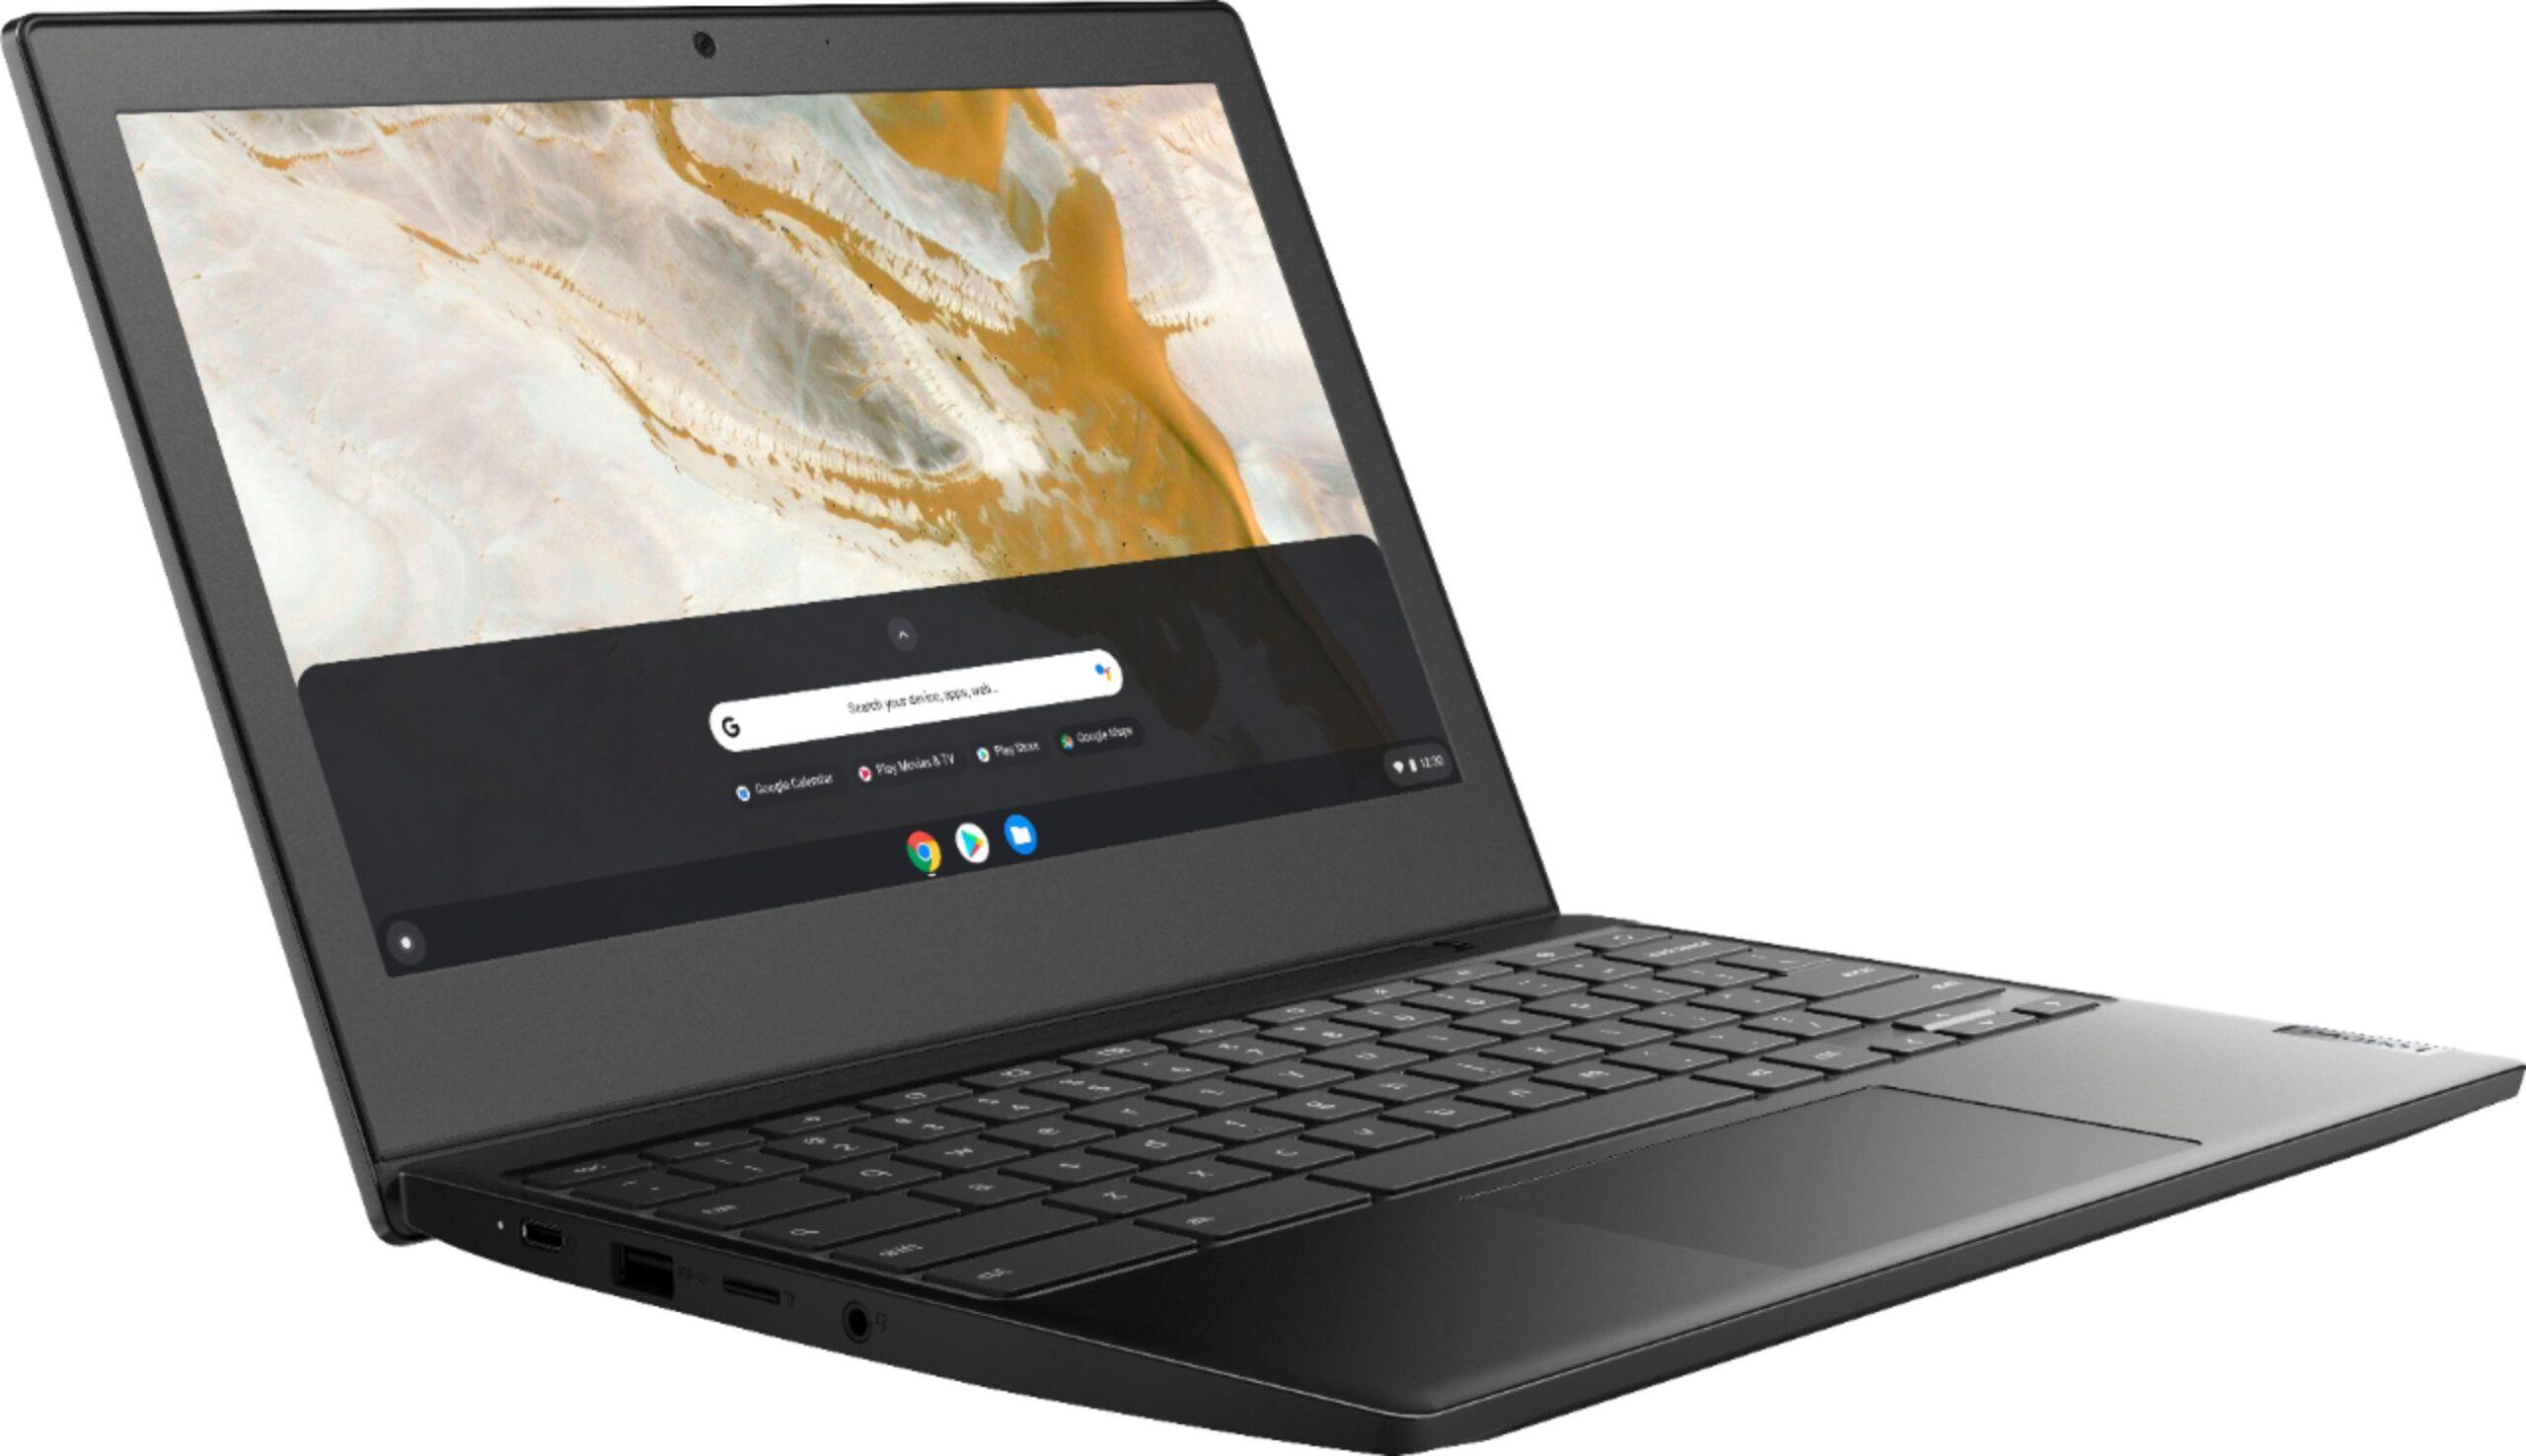 Here's an amazing early Black Friday deal up for grabs… 8e0a99ff chromebook scaled